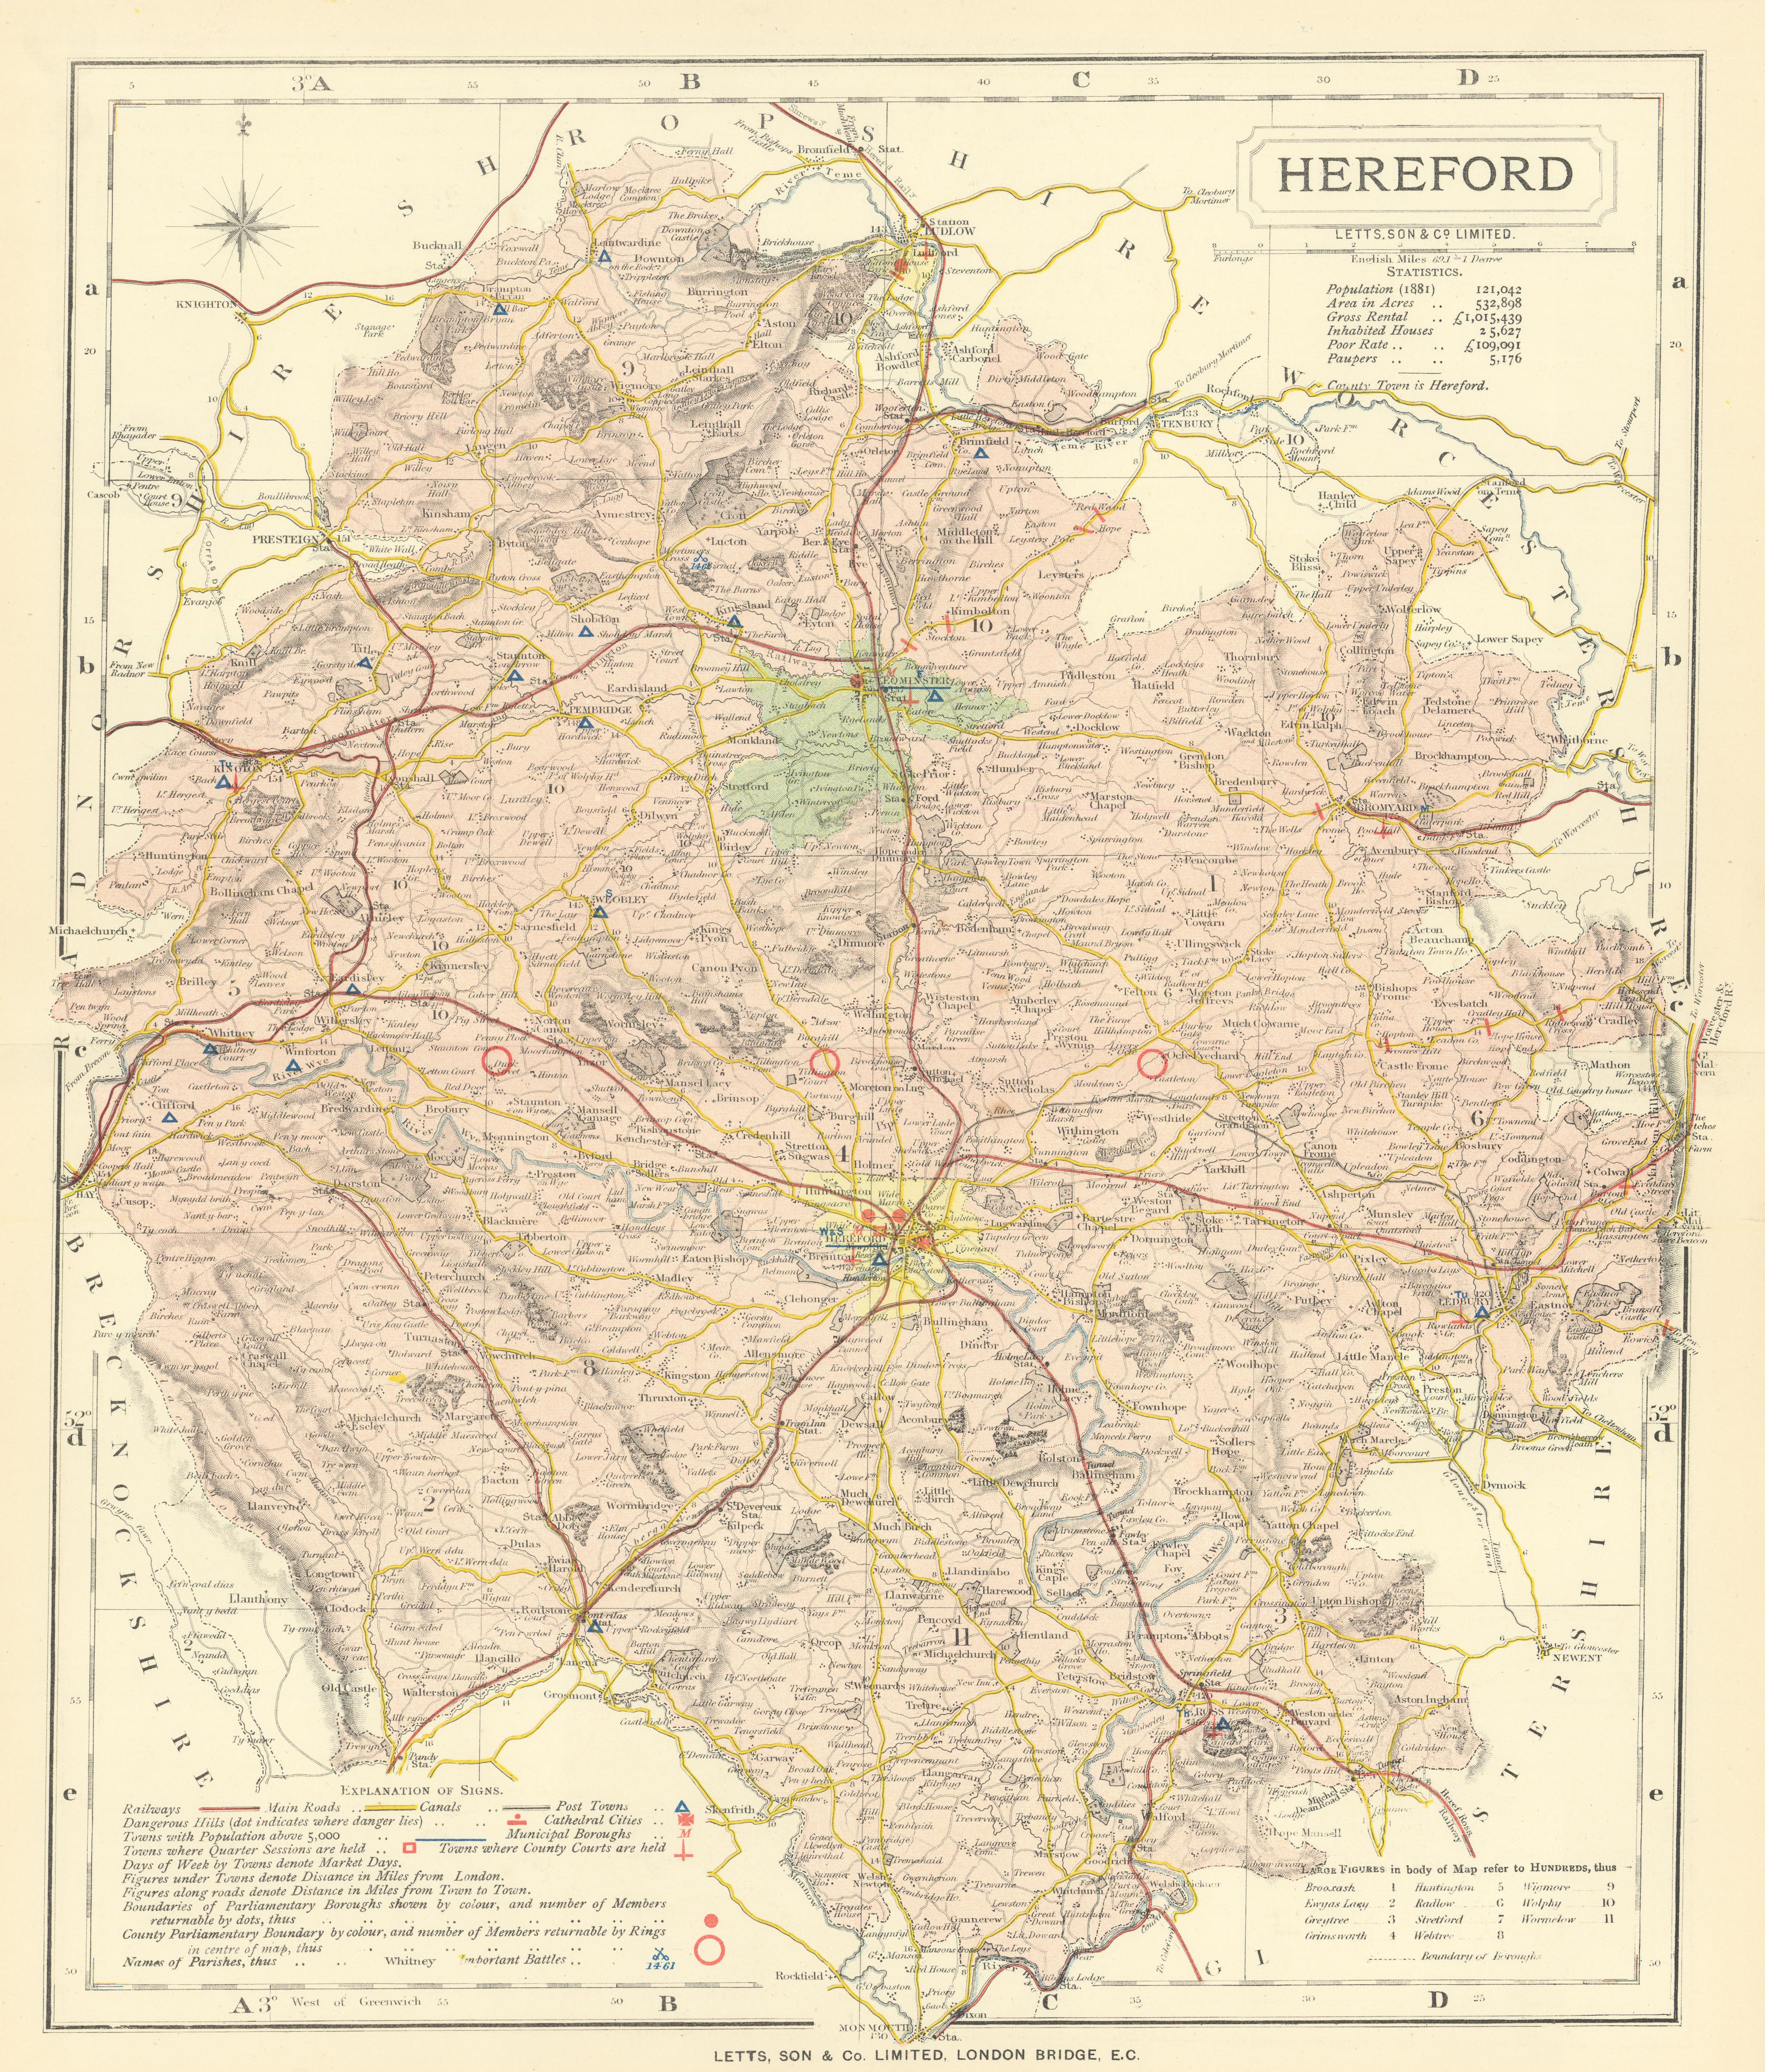 Associate Product Herefordshire county map showing Post Towns & Market Days. LETTS 1884 old